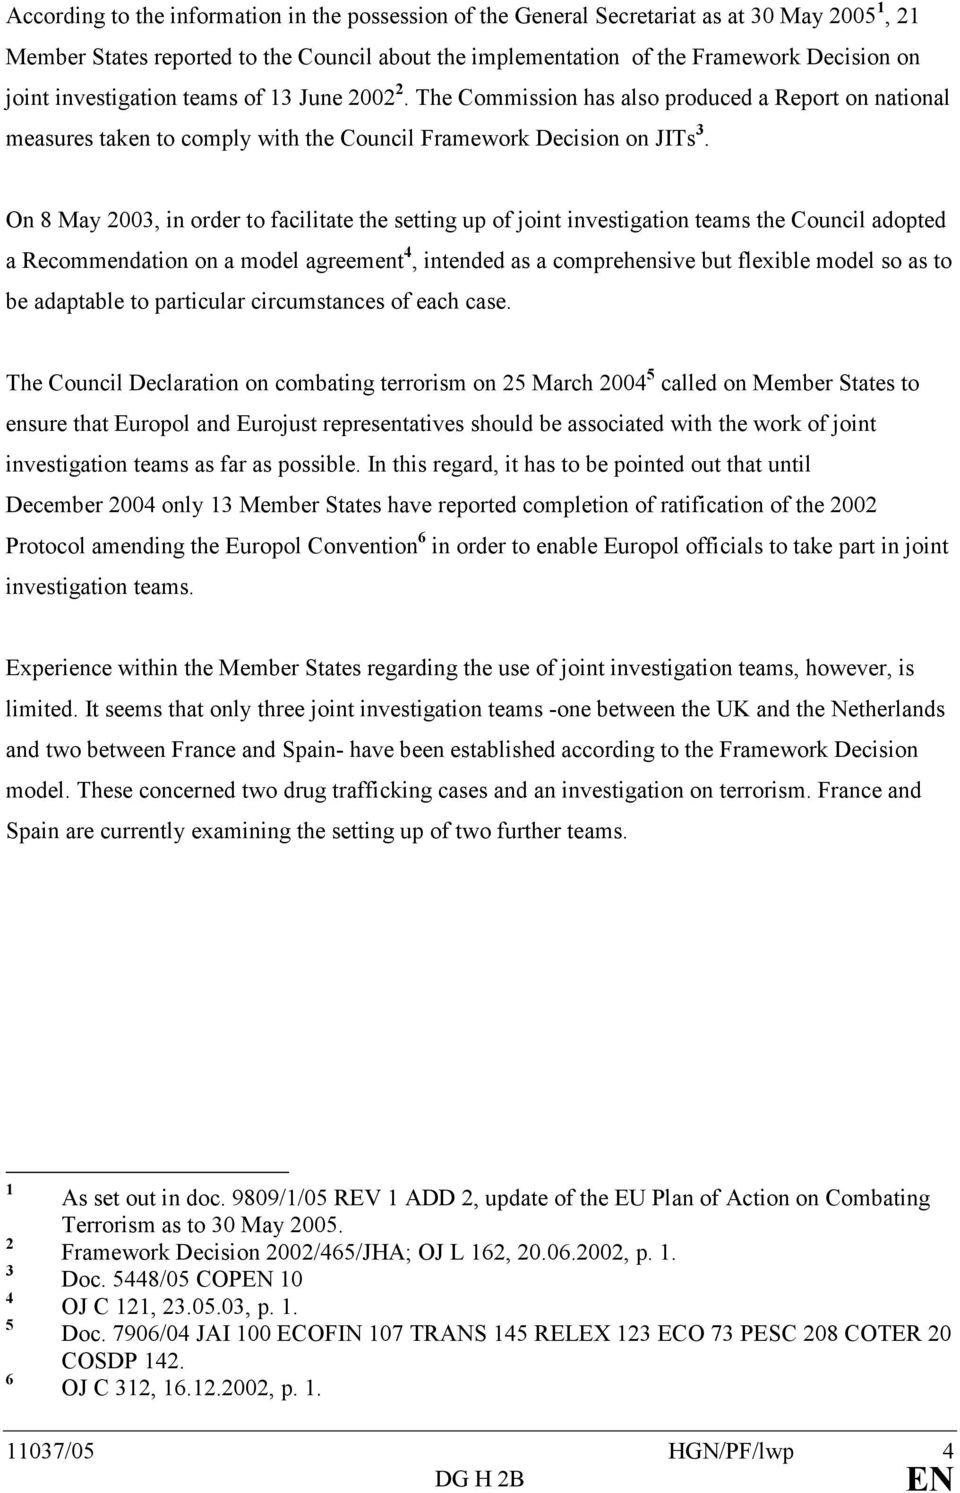 On 8 May 2003, in order to facilitate the setting up of joint investigation teams the Council adopted a Recommendation on a model agreement 4, intended as a comprehensive but flexible model so as to